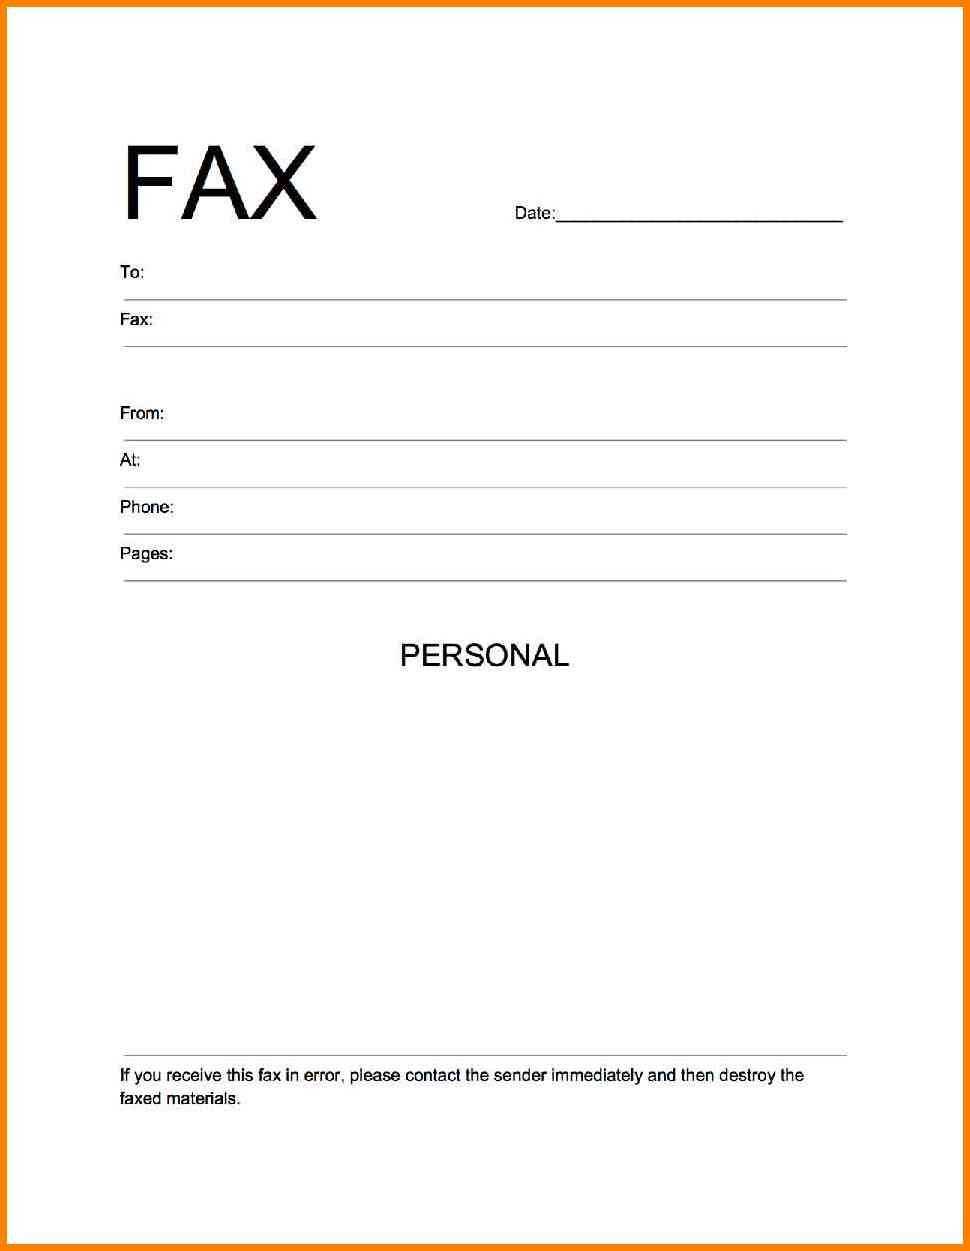 Fax Cover Sheet Template Word Spreadsheet Examples Printable Inside Fax Cover Sheet Template Word 2010